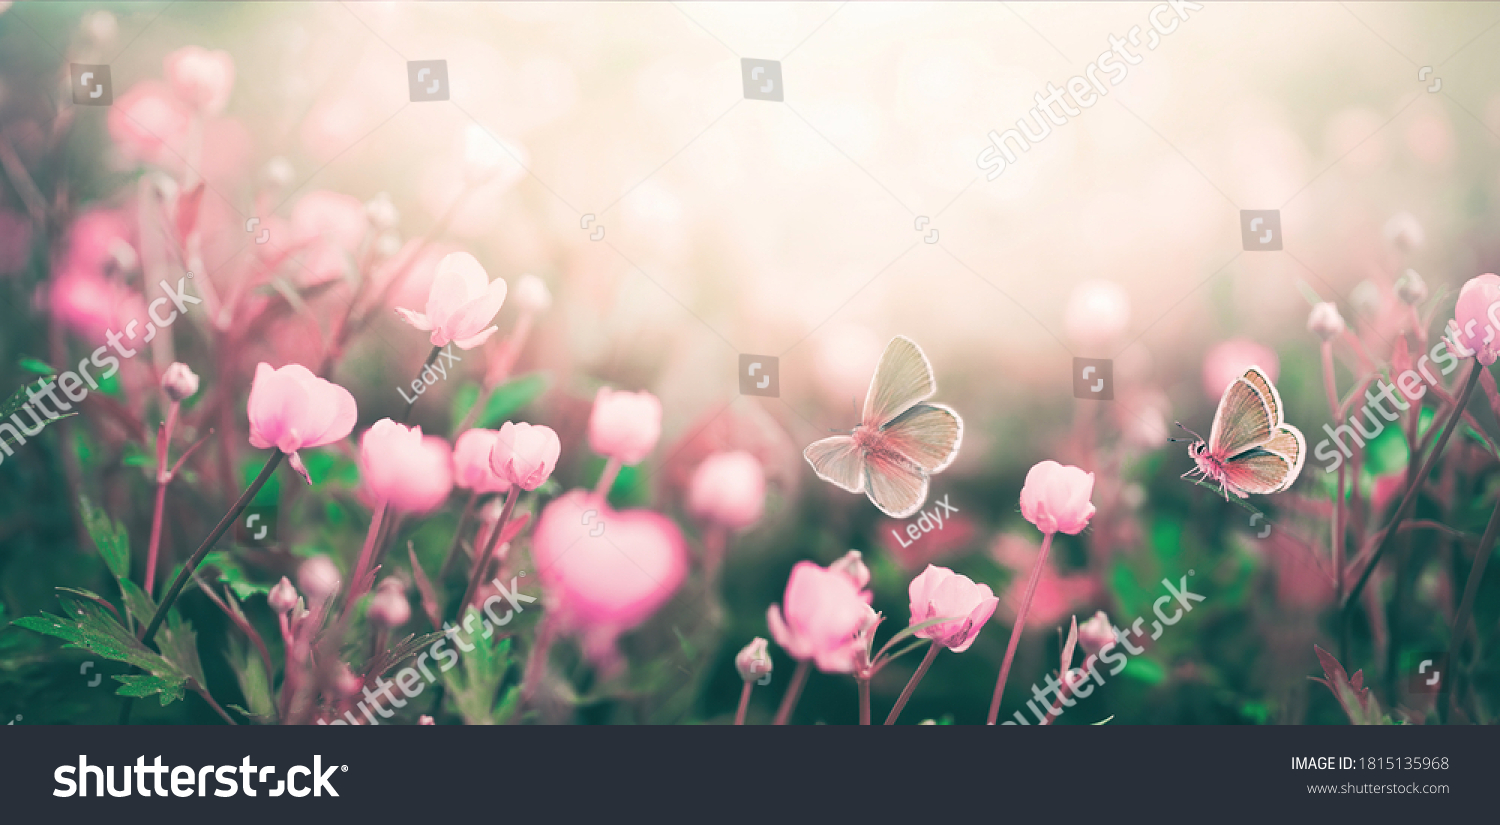 Wild pink flowers bathed in sunlight in field and two fluttering butterfly on nature outdoors, soft selective focus, close-up macro. Magic artistic image. #1815135968